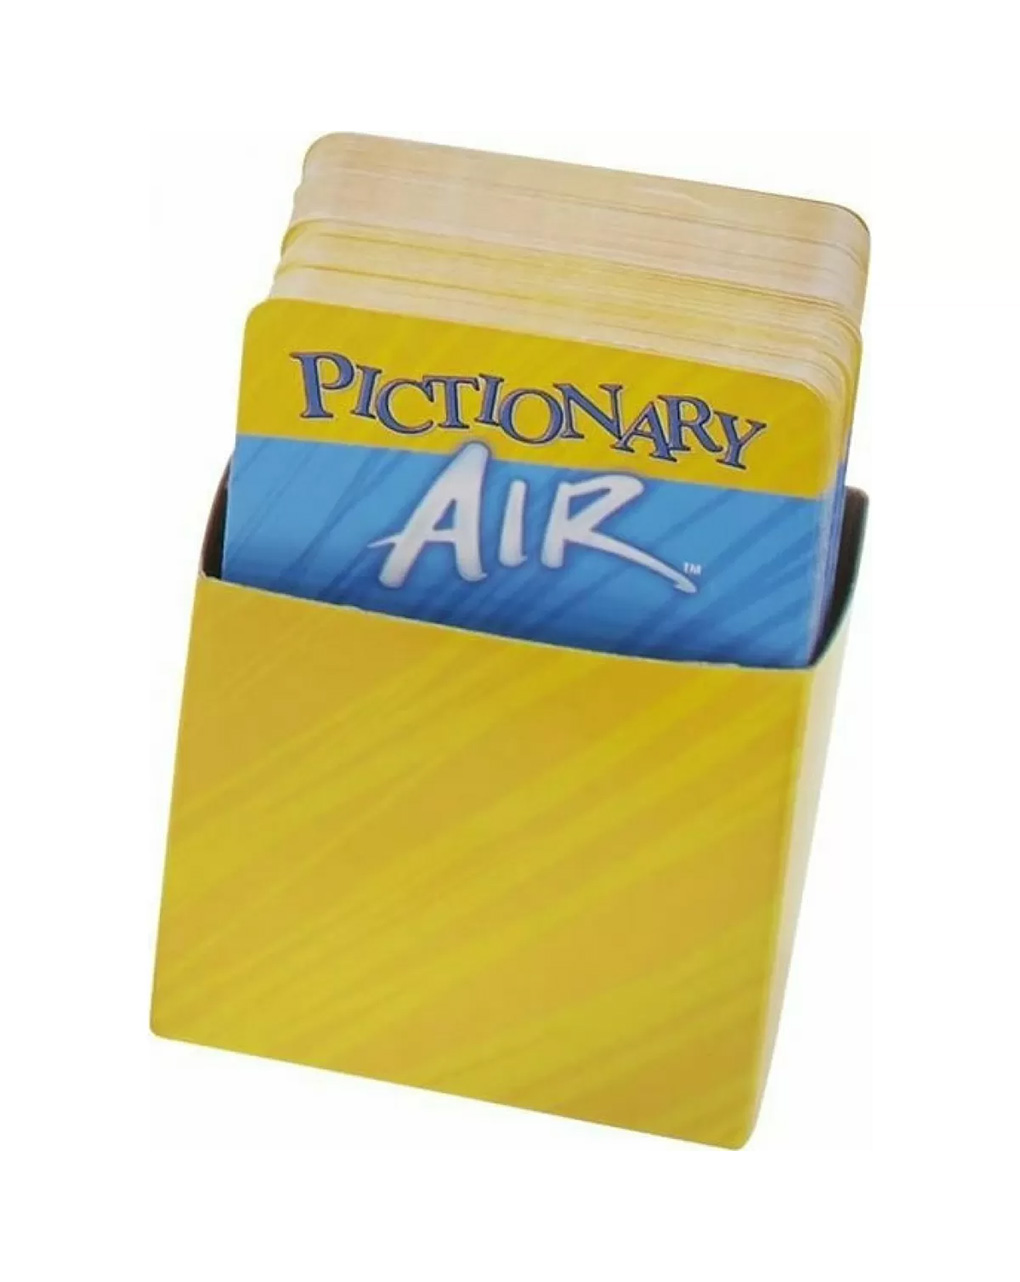 Pictionary air gwt11 - Mattel Games